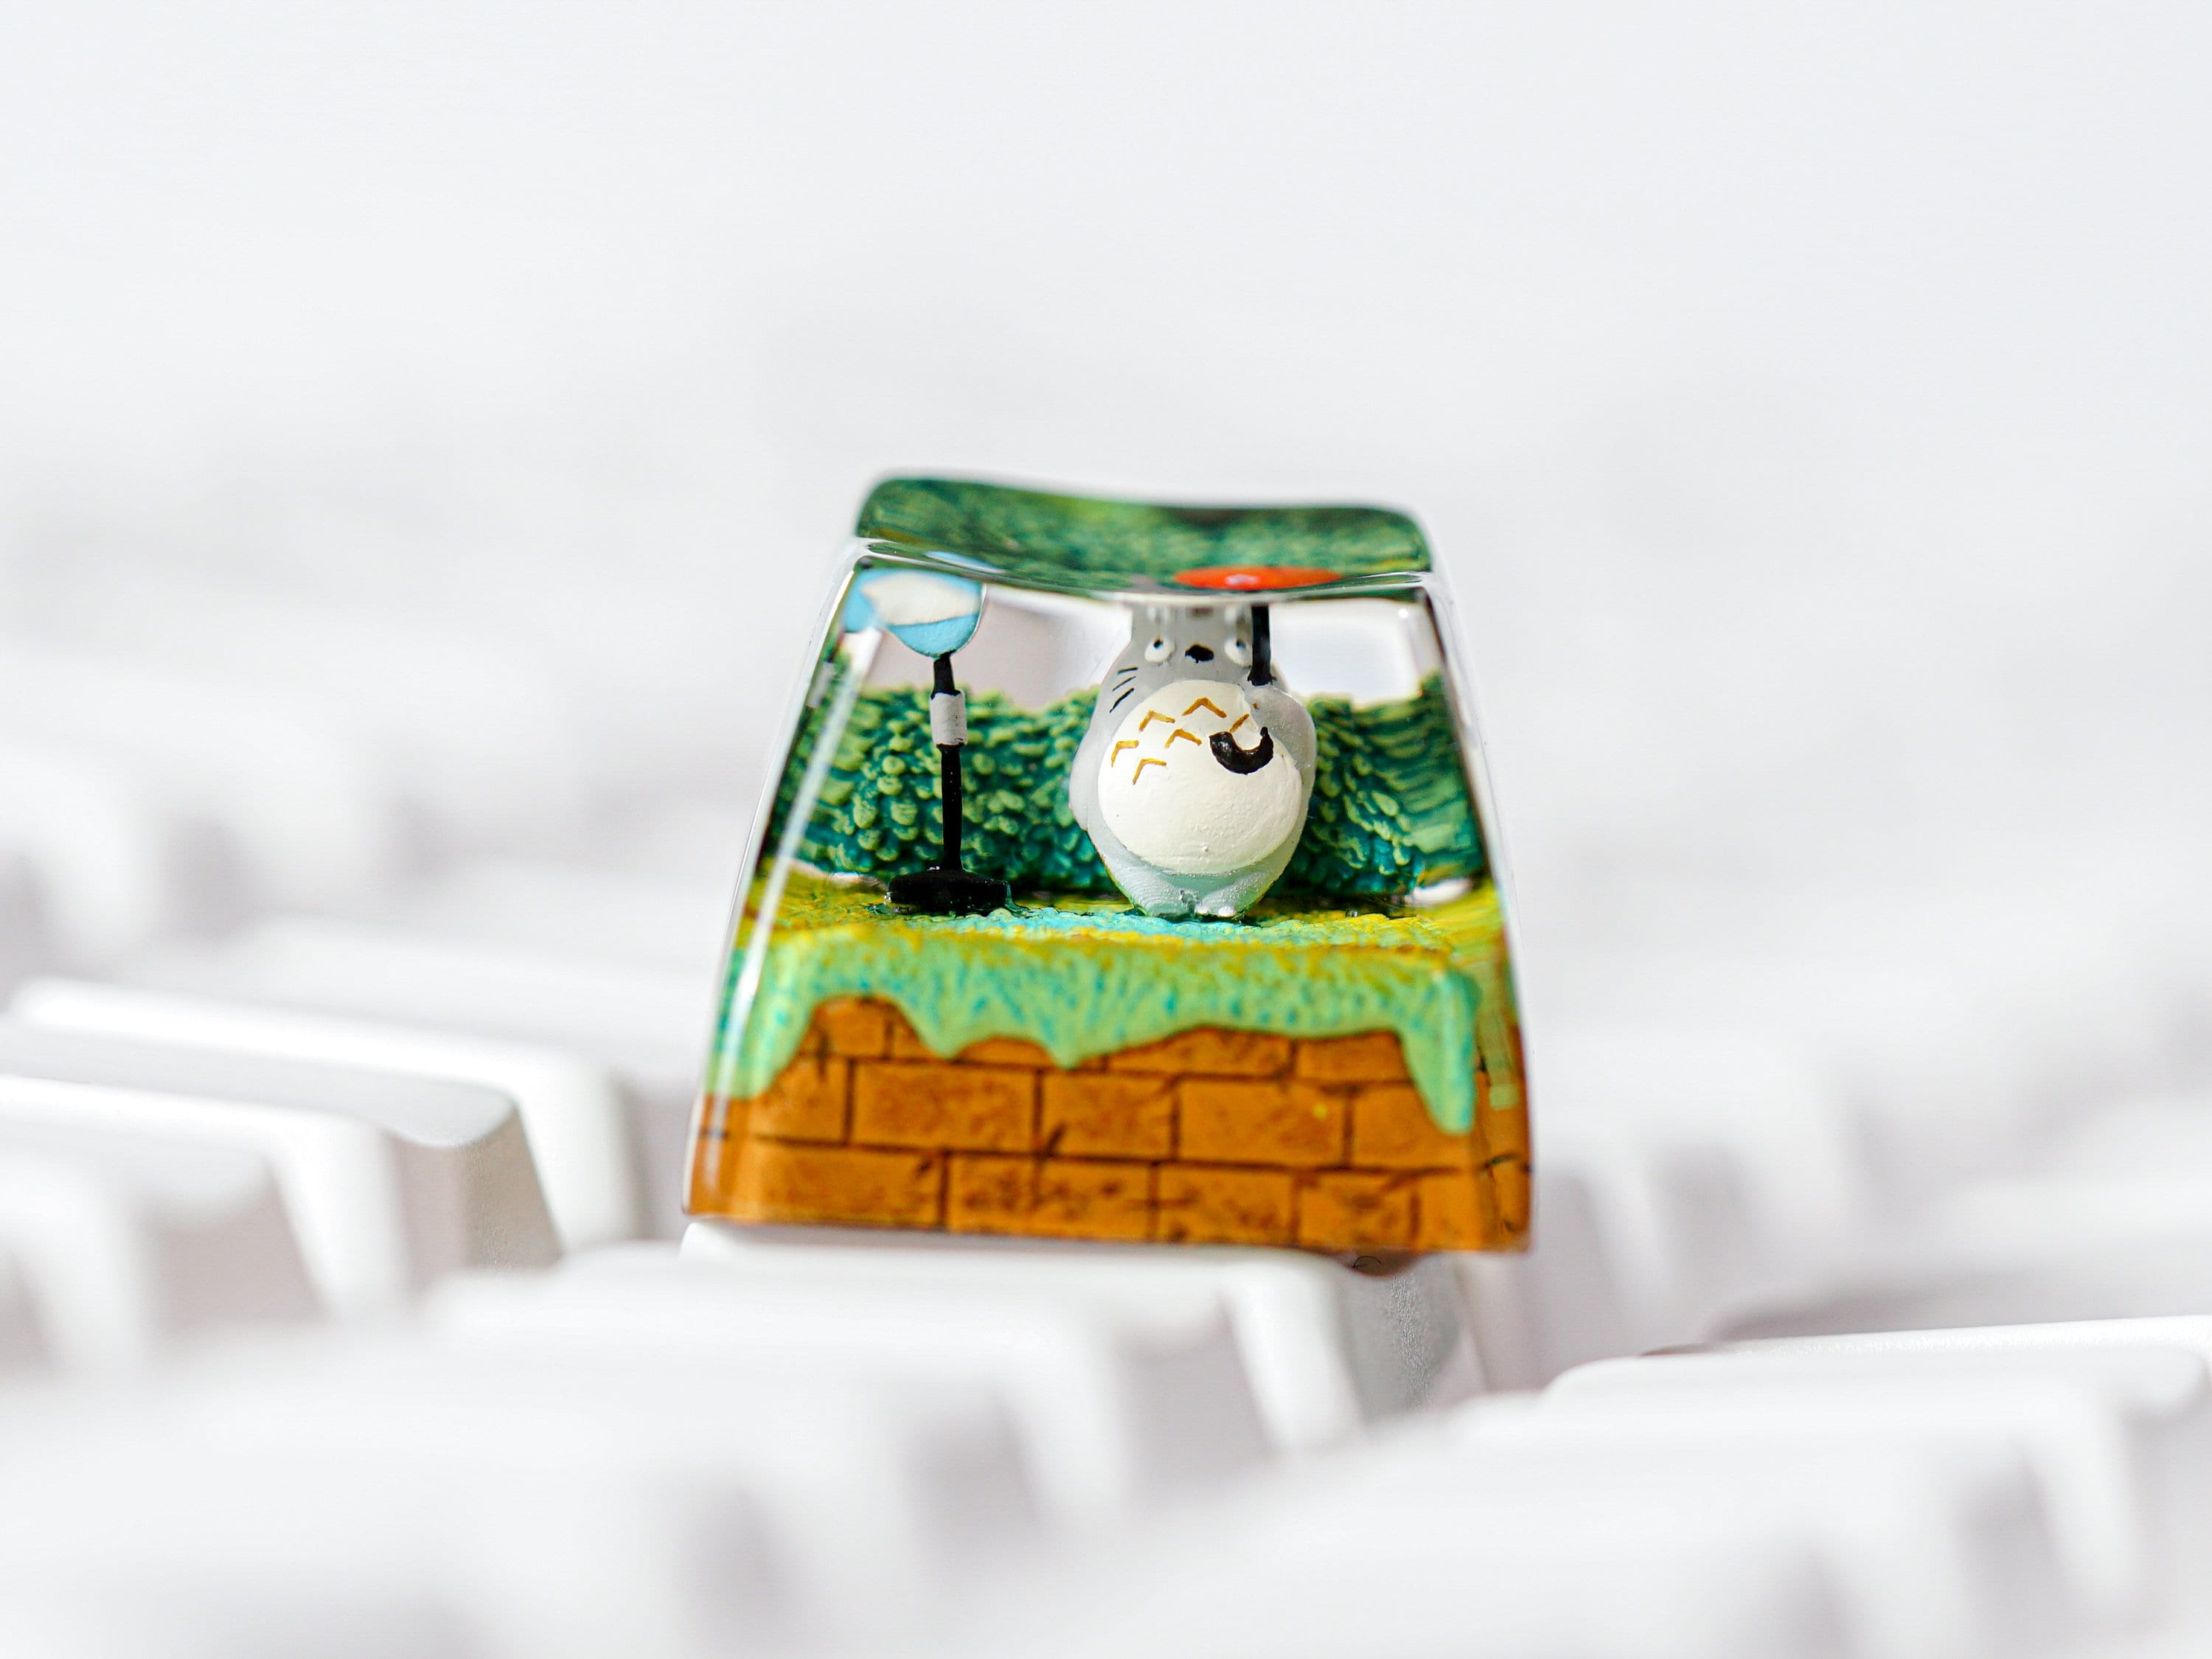 To.to.ro Keycap, Anime Keycap, Artisan Keycap, Keycap for MX Cherry Switches Michanical Keyboard, Handmade Gift